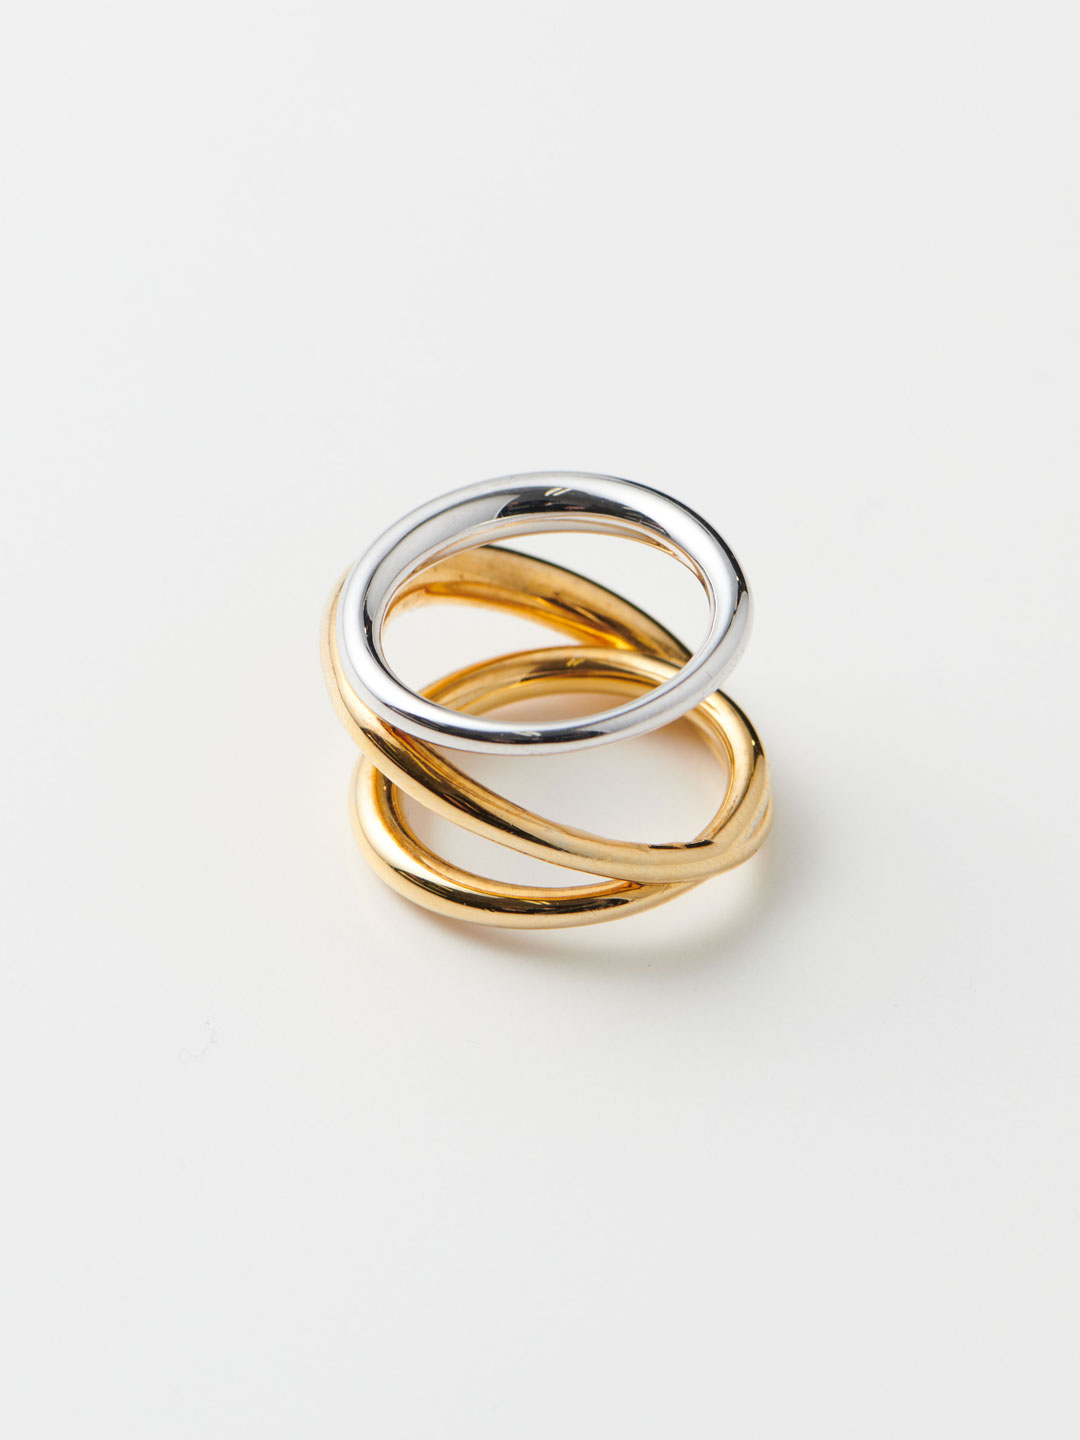 Triplet Ring - Silver/Yellow Gold